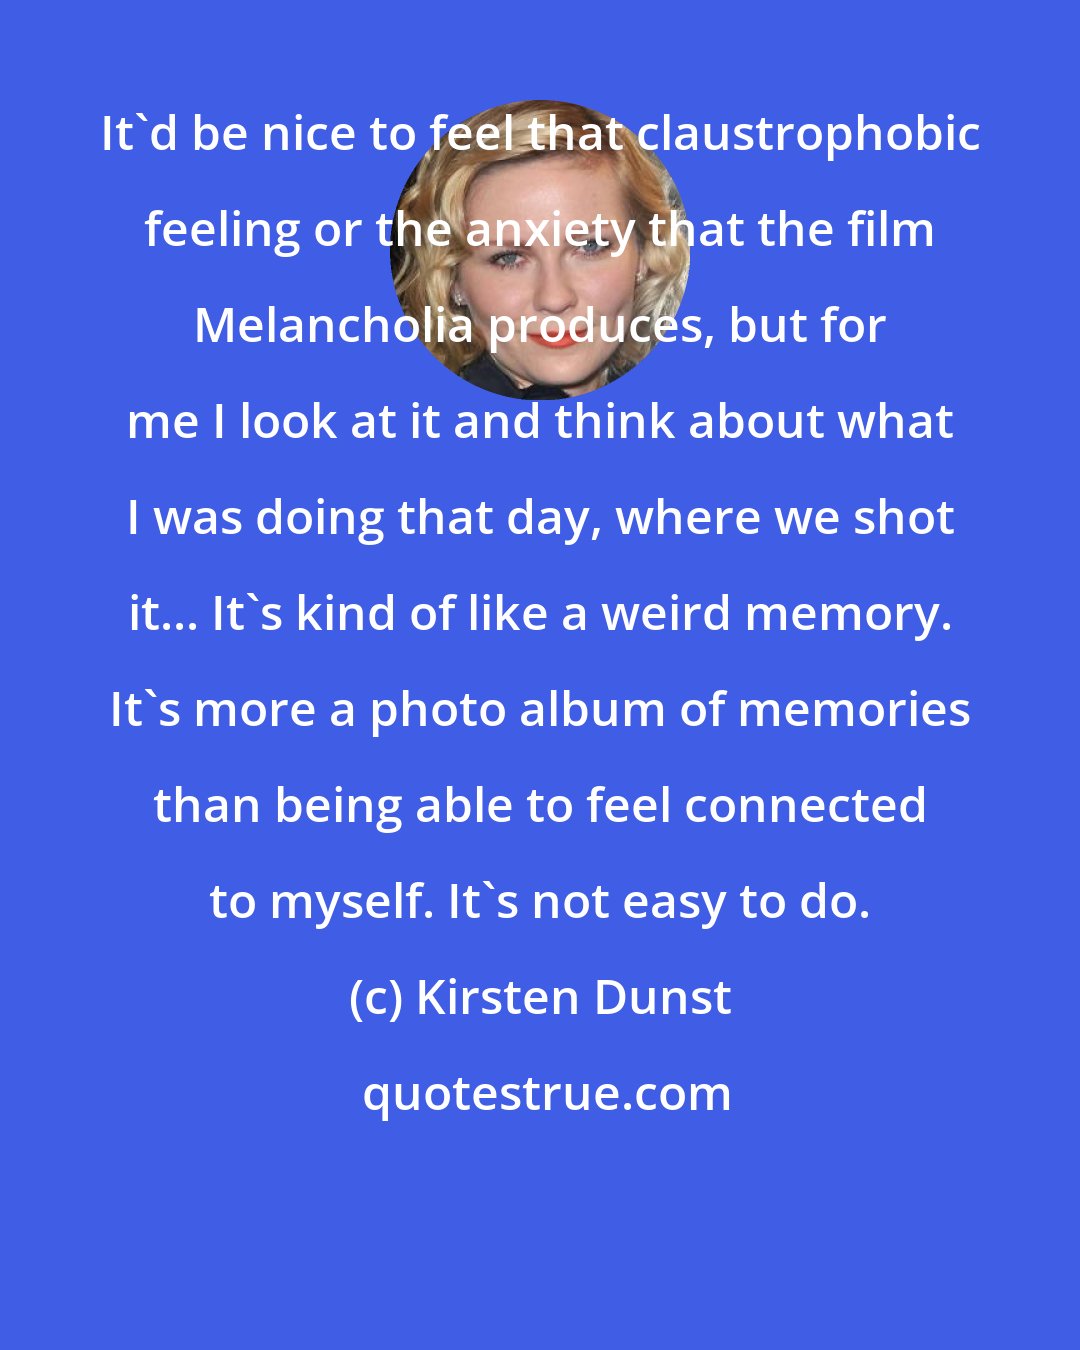 Kirsten Dunst: It'd be nice to feel that claustrophobic feeling or the anxiety that the film Melancholia produces, but for me I look at it and think about what I was doing that day, where we shot it... It's kind of like a weird memory. It's more a photo album of memories than being able to feel connected to myself. It's not easy to do.